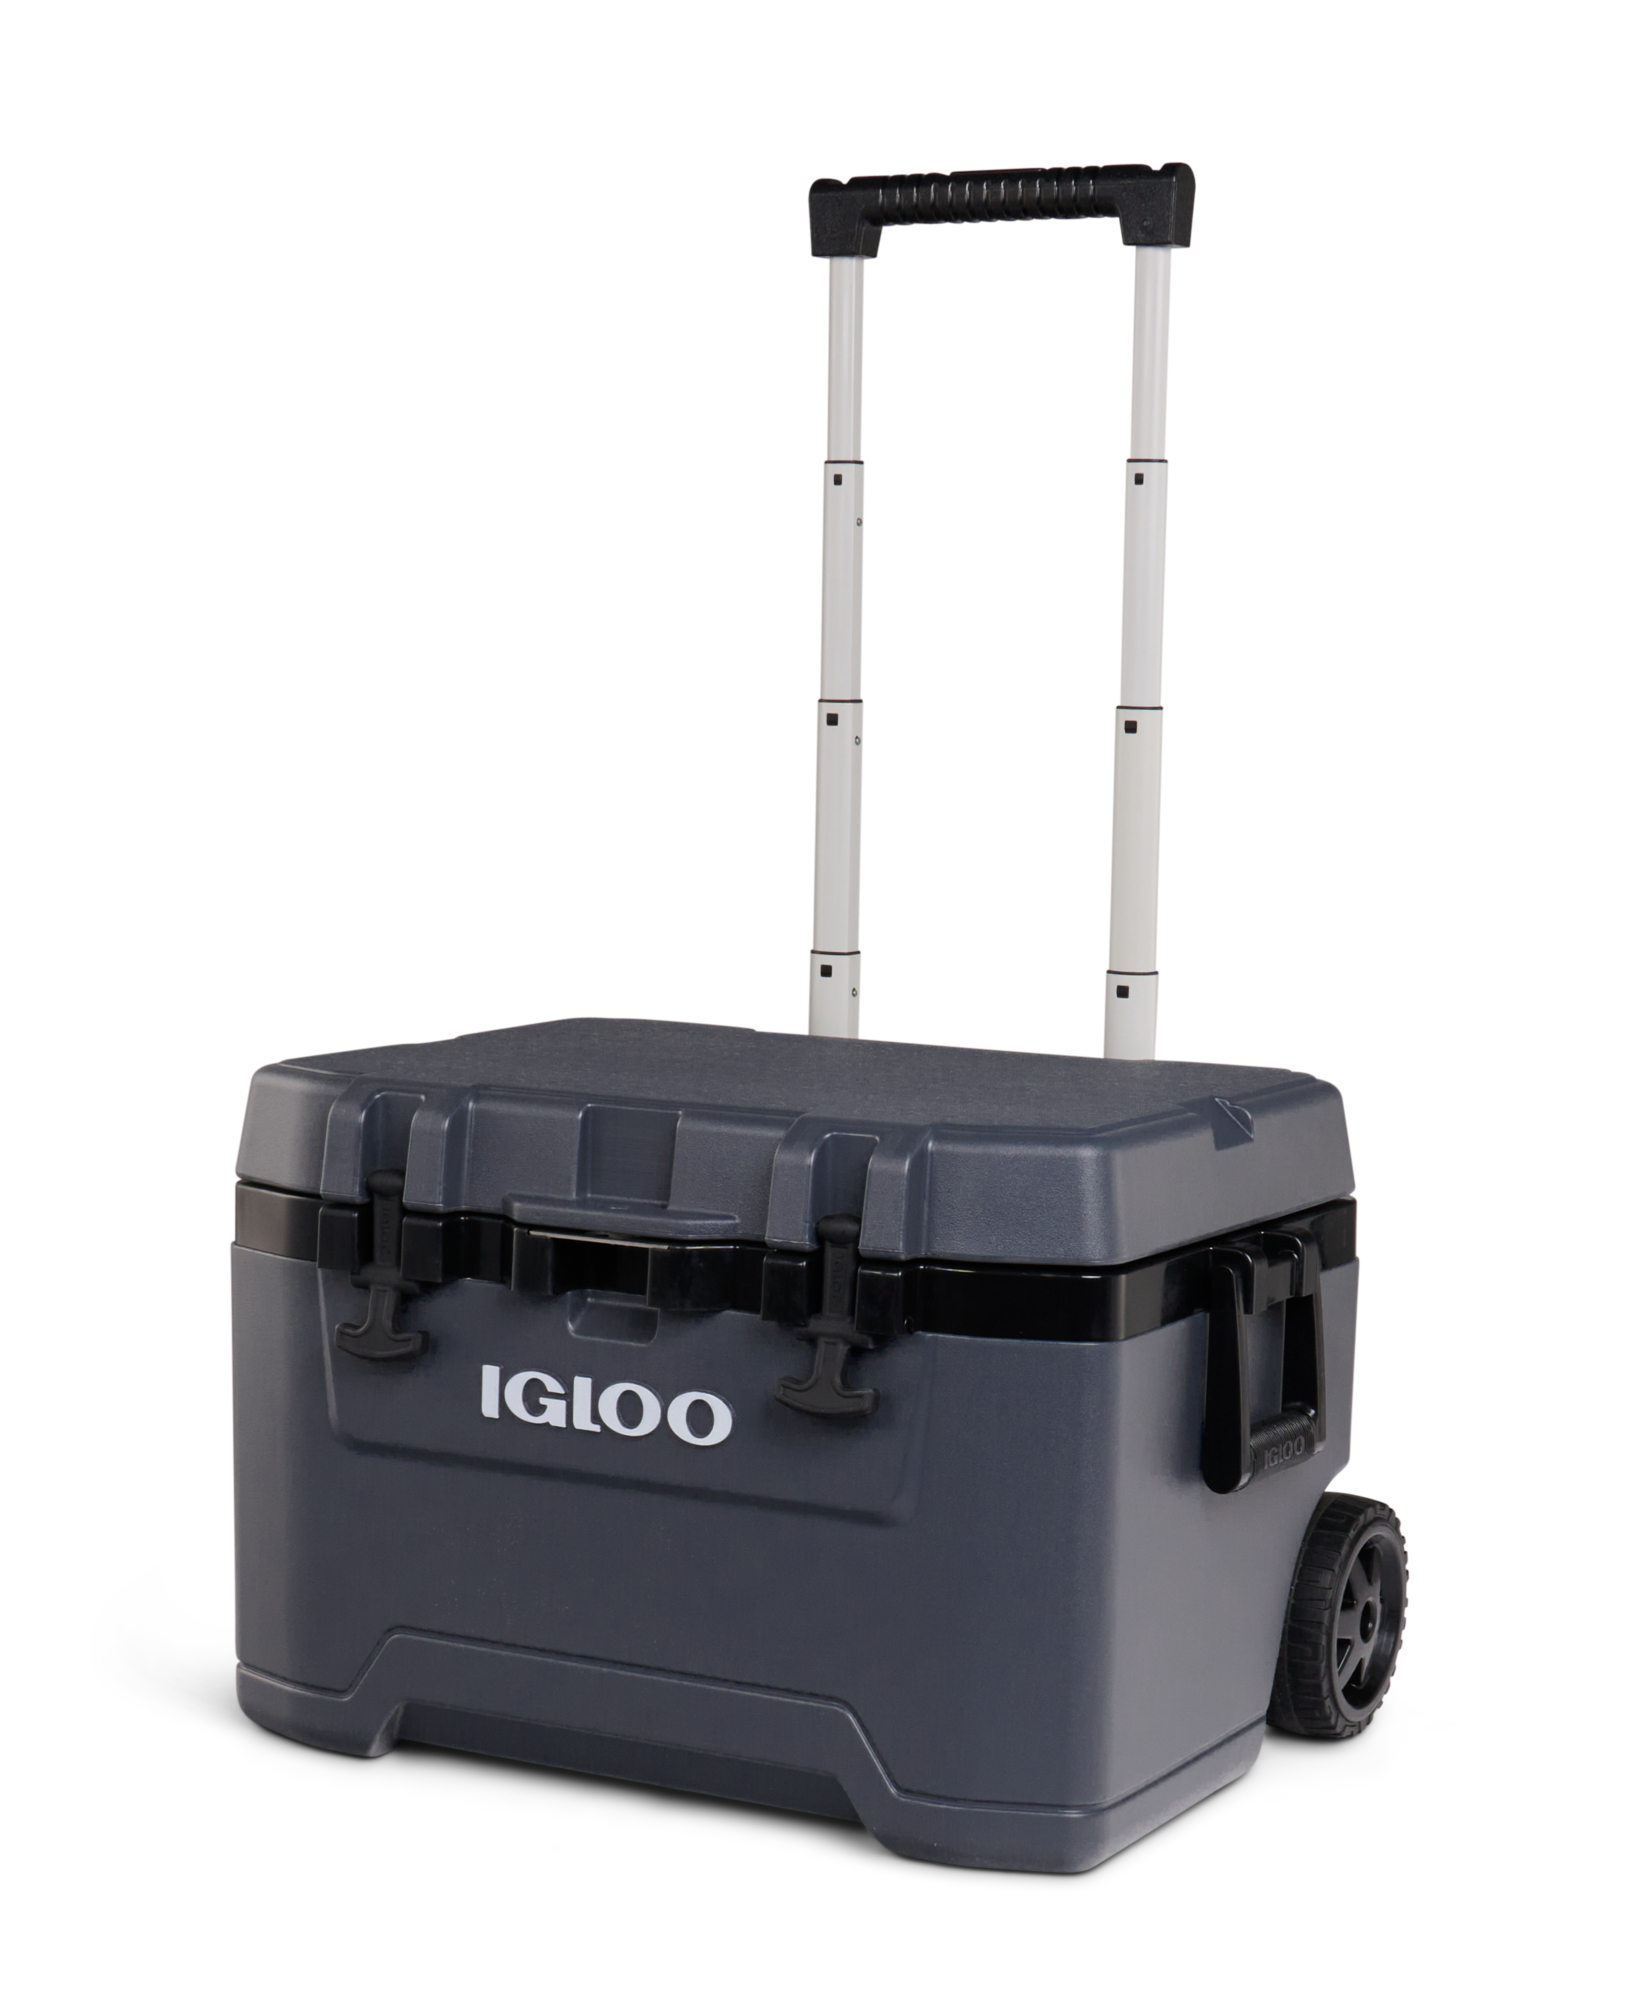 Igloo Overland 52 QT Ice Chest Cooler with Wheels, Gray (26" x 19" x 16") - image 2 of 17